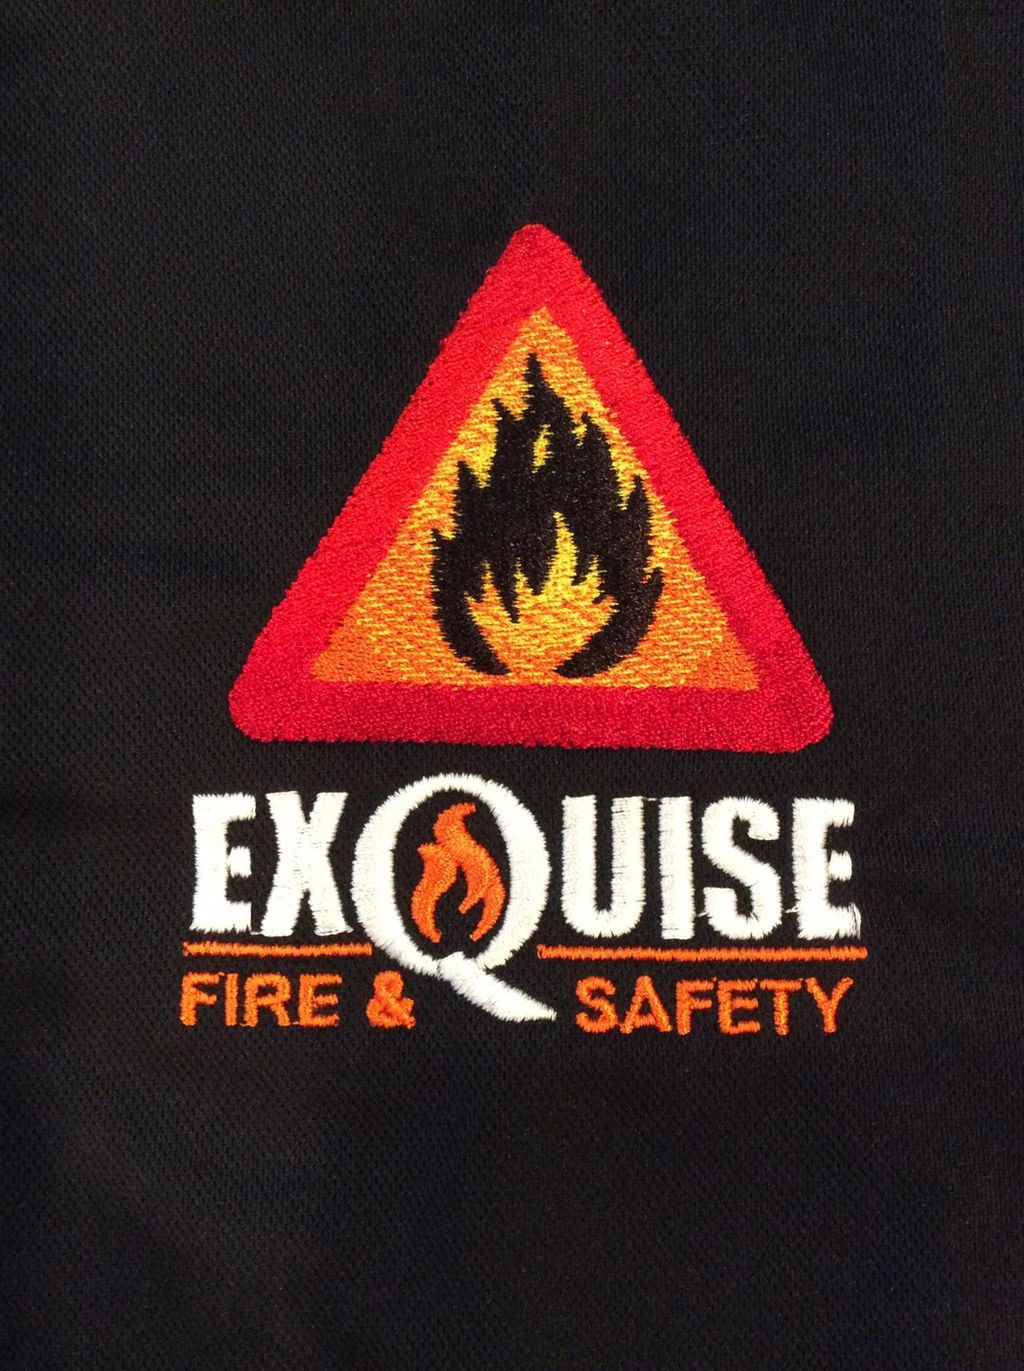 Exquise Fire & Safety